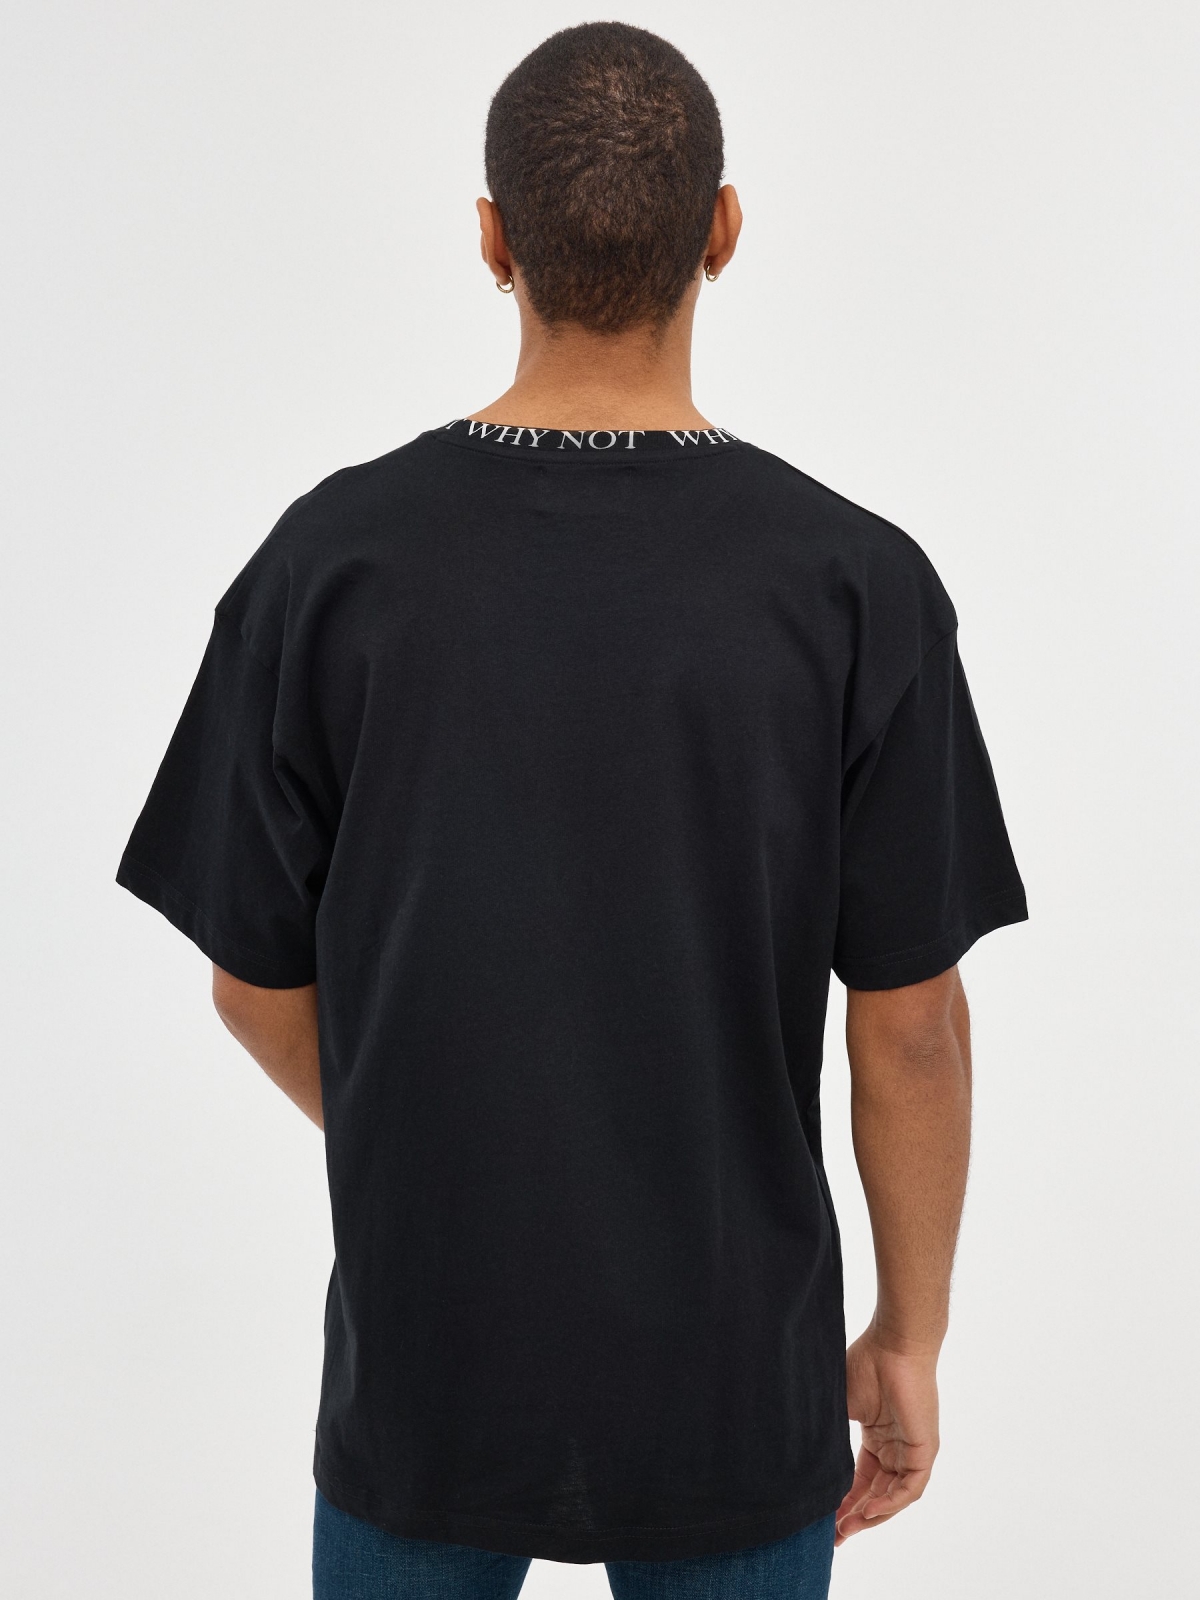 Why Not T-shirt black middle back view